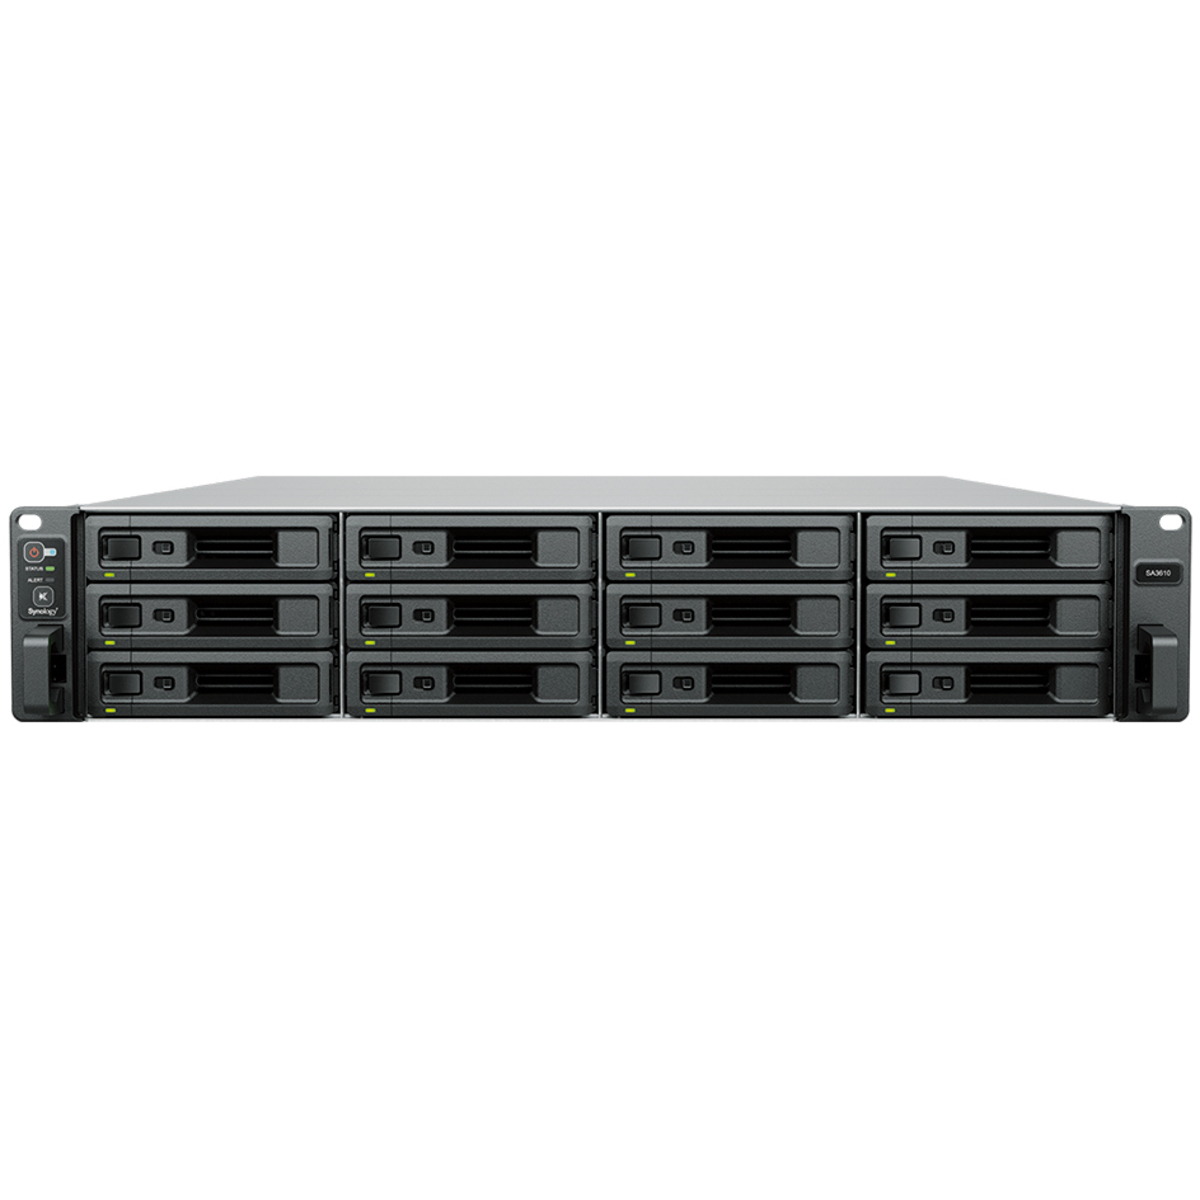 Synology RackStation SA3410 64tb 12-Bay RackMount Large Business / Enterprise NAS - Network Attached Storage Device 8x8tb Seagate BarraCuda ST8000DM004 3.5 5400rpm SATA 6Gb/s HDD CONSUMER Class Drives Installed - Burn-In Tested RackStation SA3410